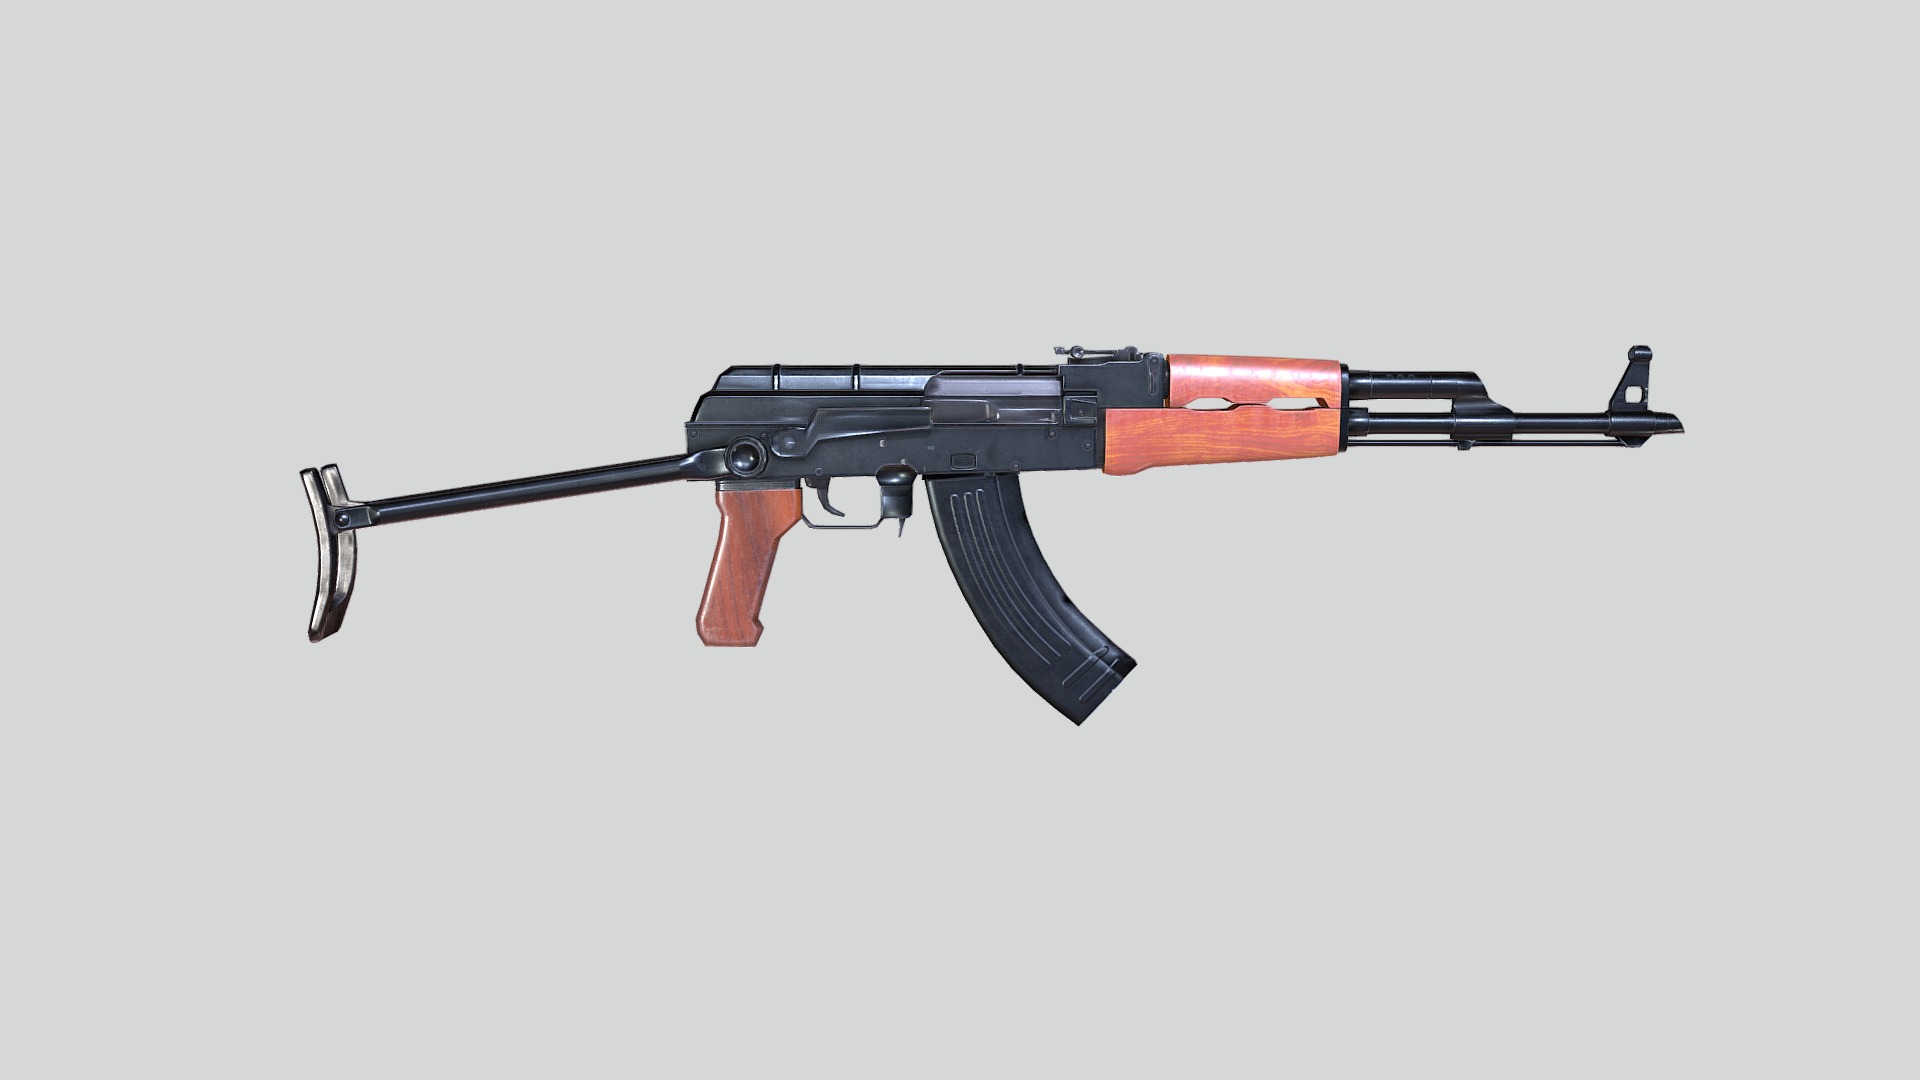 AKMS - Underfolding Stock version of the AK-47 Soviet Assault Rifle chambered in 7.62x39mm. All major moving parts (IE Trigger, Magazine, Folding Stock) are separate meshes which can be rigged &amp; animated directly.


FBX: Receiver, Folding Stock, Bolt Carrier, Magazine, Sights, Trigger.
Separate Sub-Mesh Parts for Rigging &amp; Animation.
2 x PBR Materials &amp; 2048x2048 Textures.
PNG's, Albedo, Normal, Rough, Occlusion.

Copyright 2018 Skipper Research &amp; Development, LLC 3d model